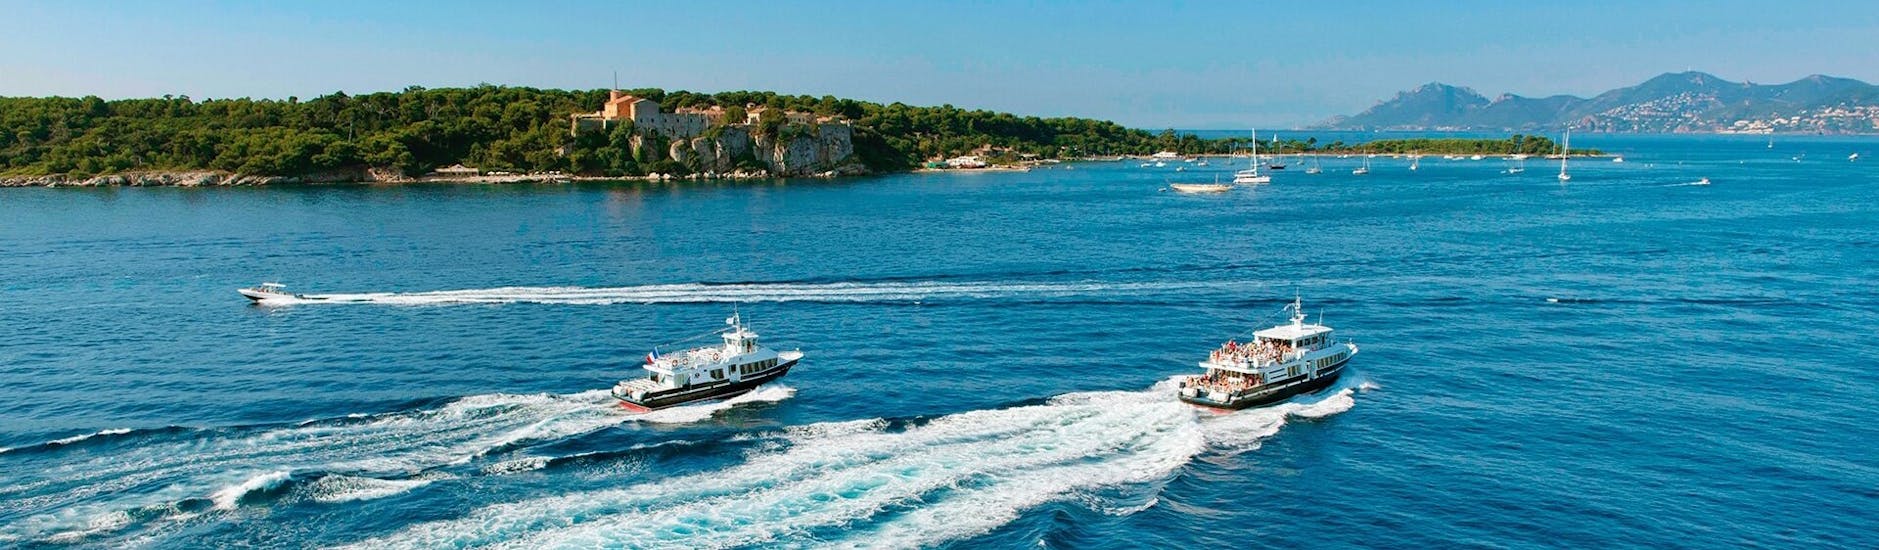 View of the boats during the Boat Transfer from Cannes to Sainte-Marguerite Island with Trans Côte d'Azur.